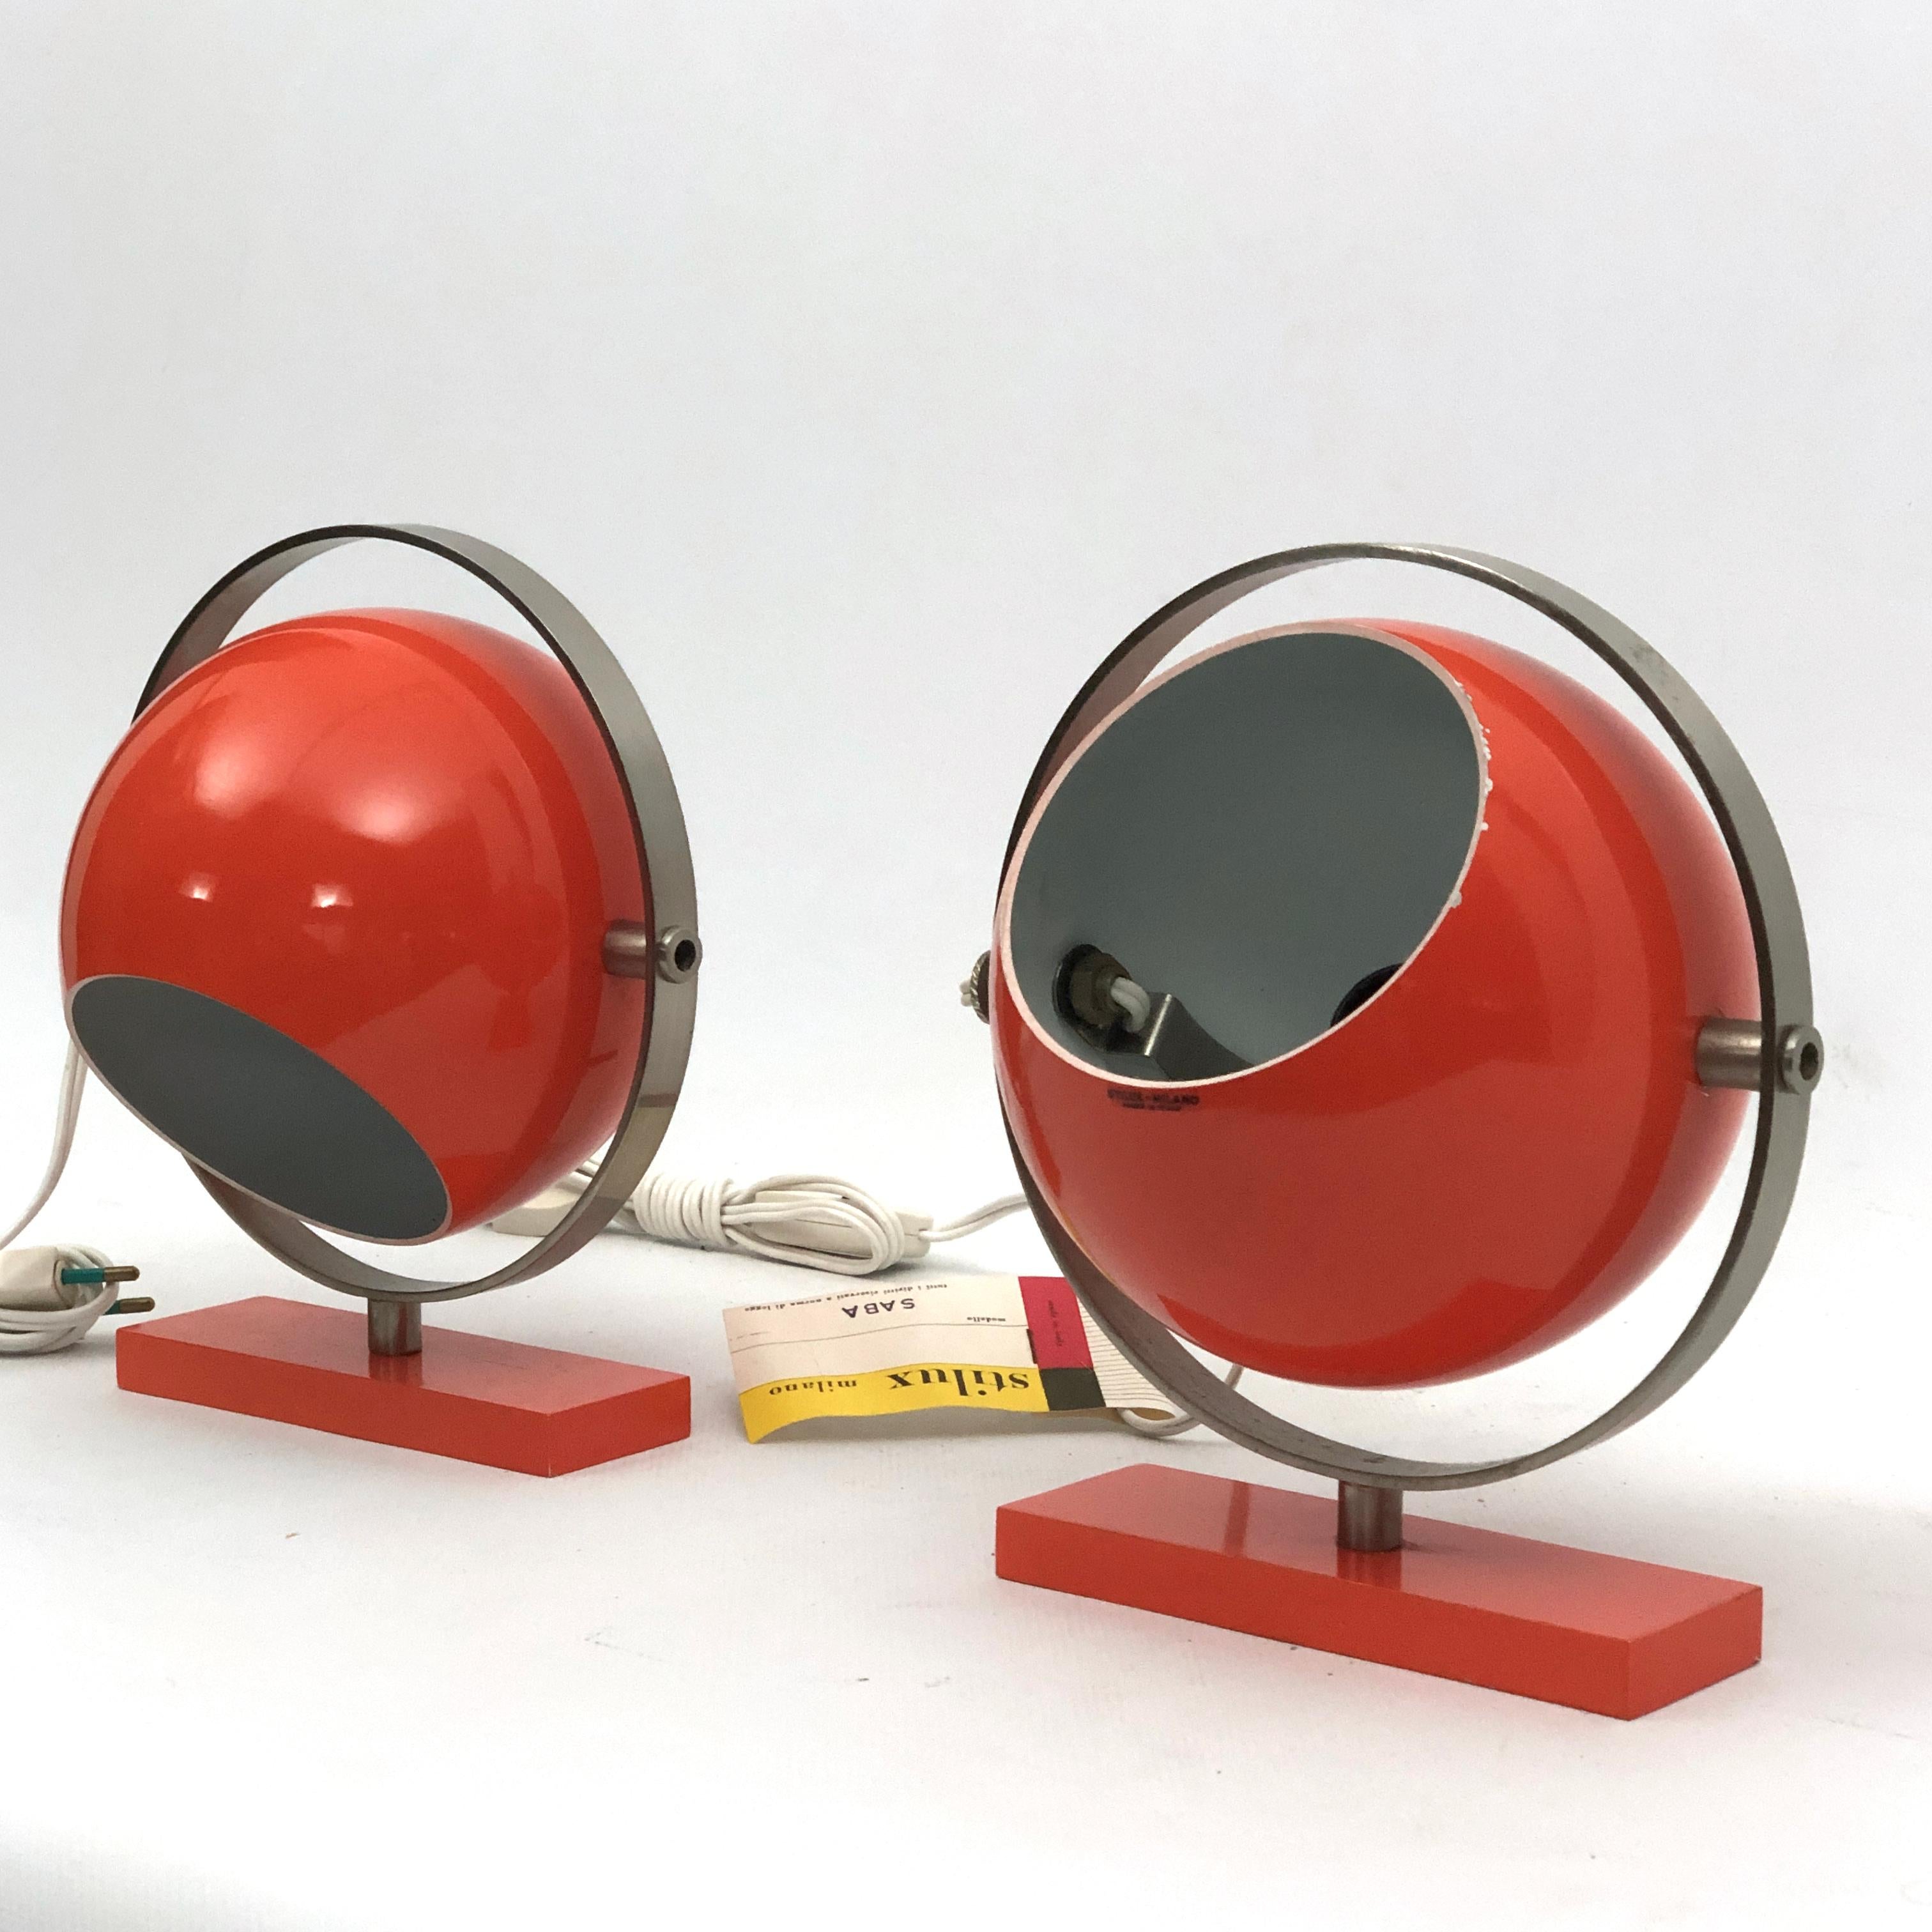 Stilux Milano Model Saba, Rare Orange Globe Table Lamps from 60s. Set of Two For Sale 3